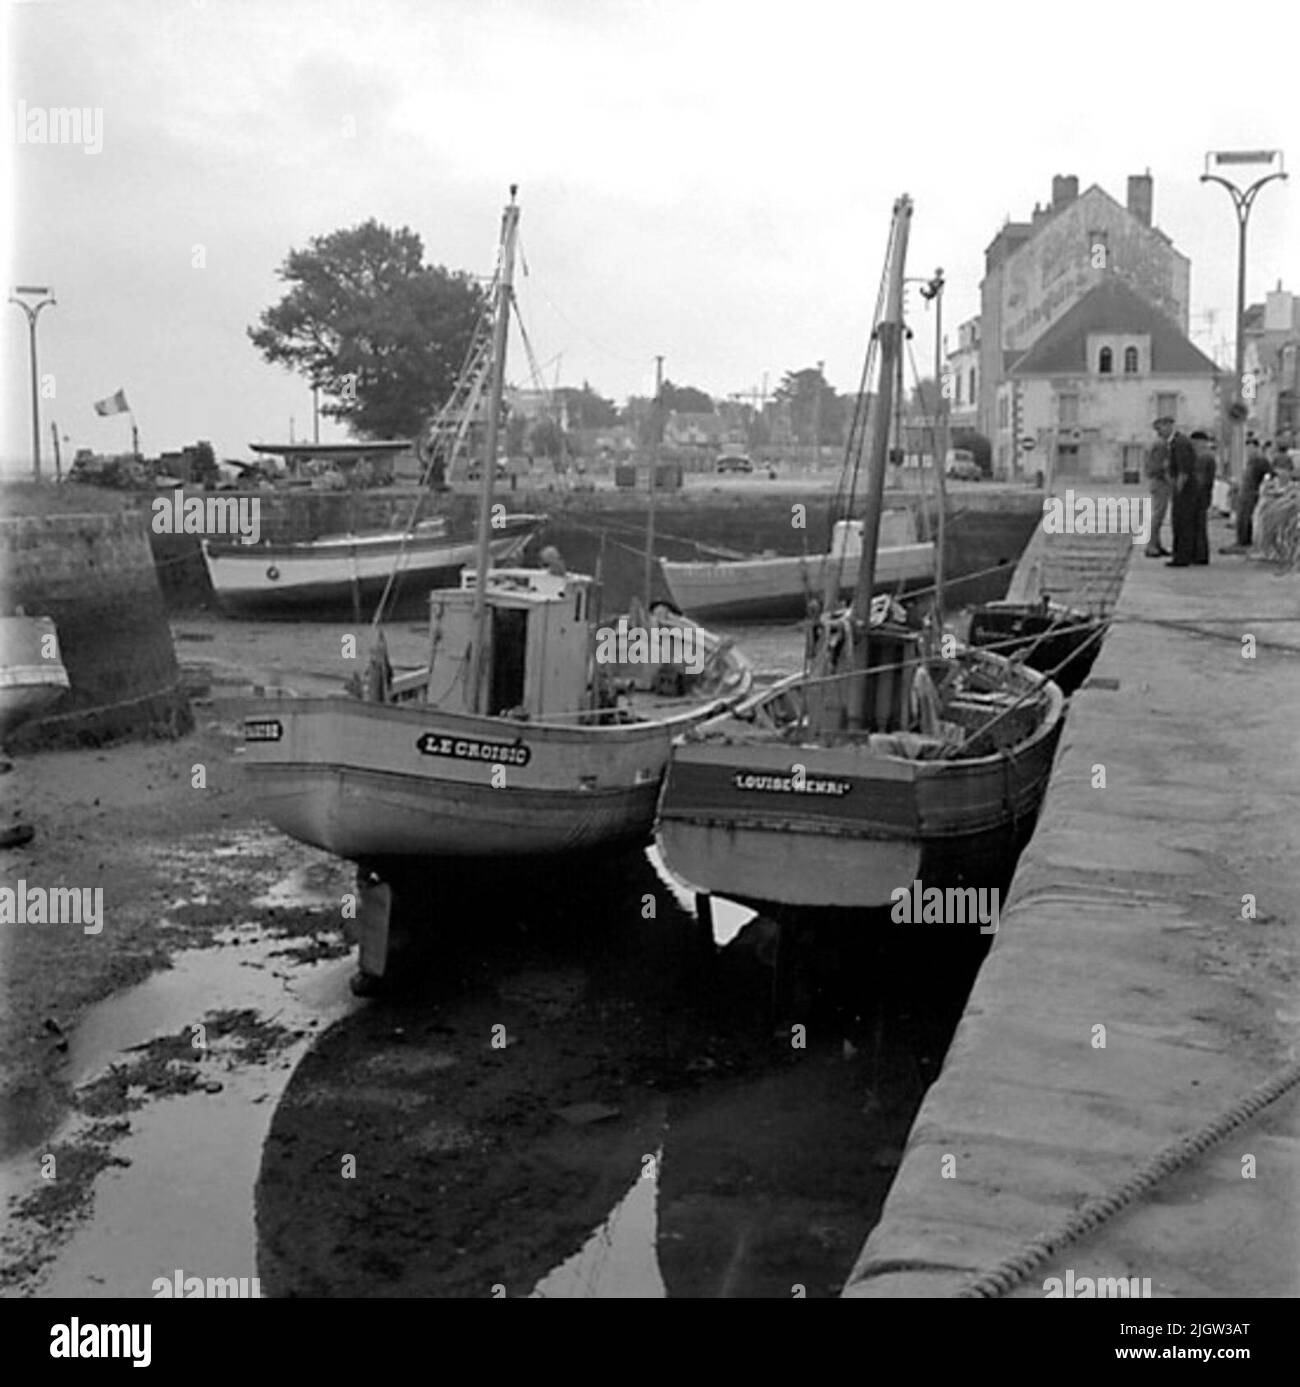 10. France. Photo journal is available at B.M.A. + Photo albums. Acquisition: Books and archive materials. Photos taken 1959-10-17.12 Pictures in series. According to notes: France. Atlantic coast, Le Croisic, 17/10-59. Boats of different types. Most common and oldest? Seems the boats with aft mirror to be, but boats with hedges or cruise only also occur. The latter appear to have first gained entry among the trawls, while the smaller boats are still clearly dominated by the stern type. A number of boats are located in a port in a community. There is low tide, so the boats are at the bottom of Stock Photo